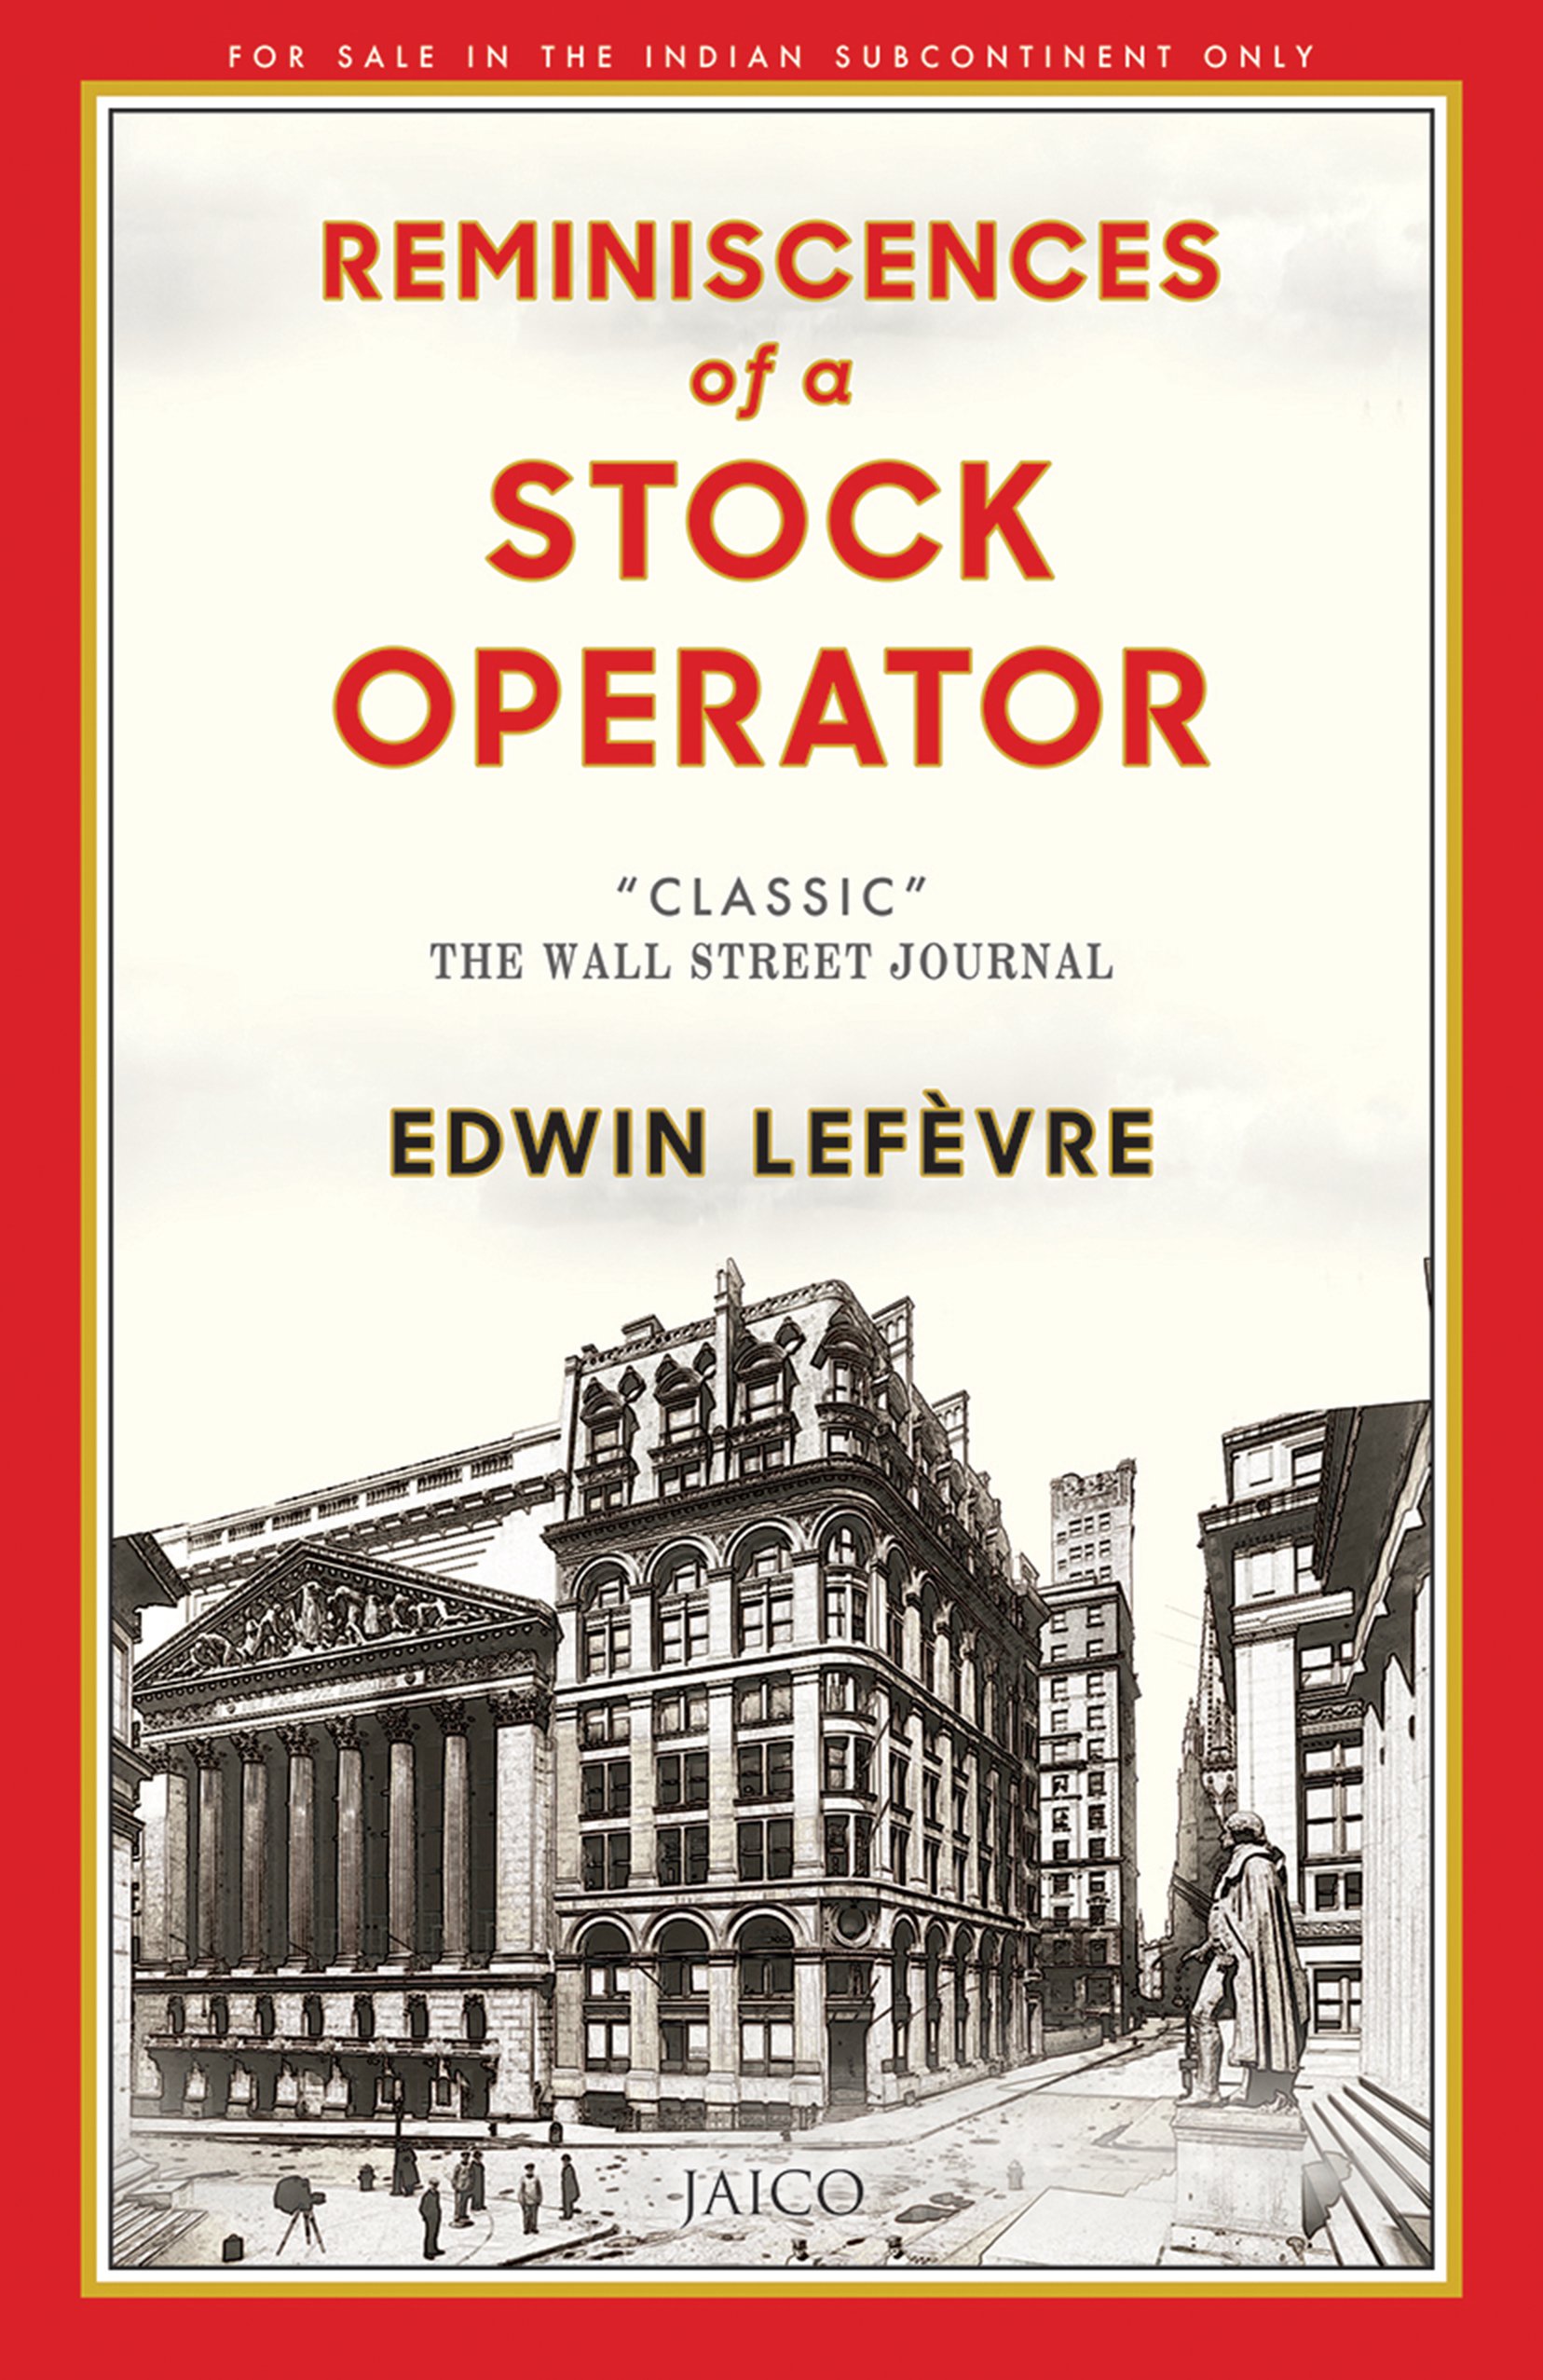 REMINISCENCES OF A STOCK OPERATOR (“CLASSIC” THE WALL STREET JOURNAL)